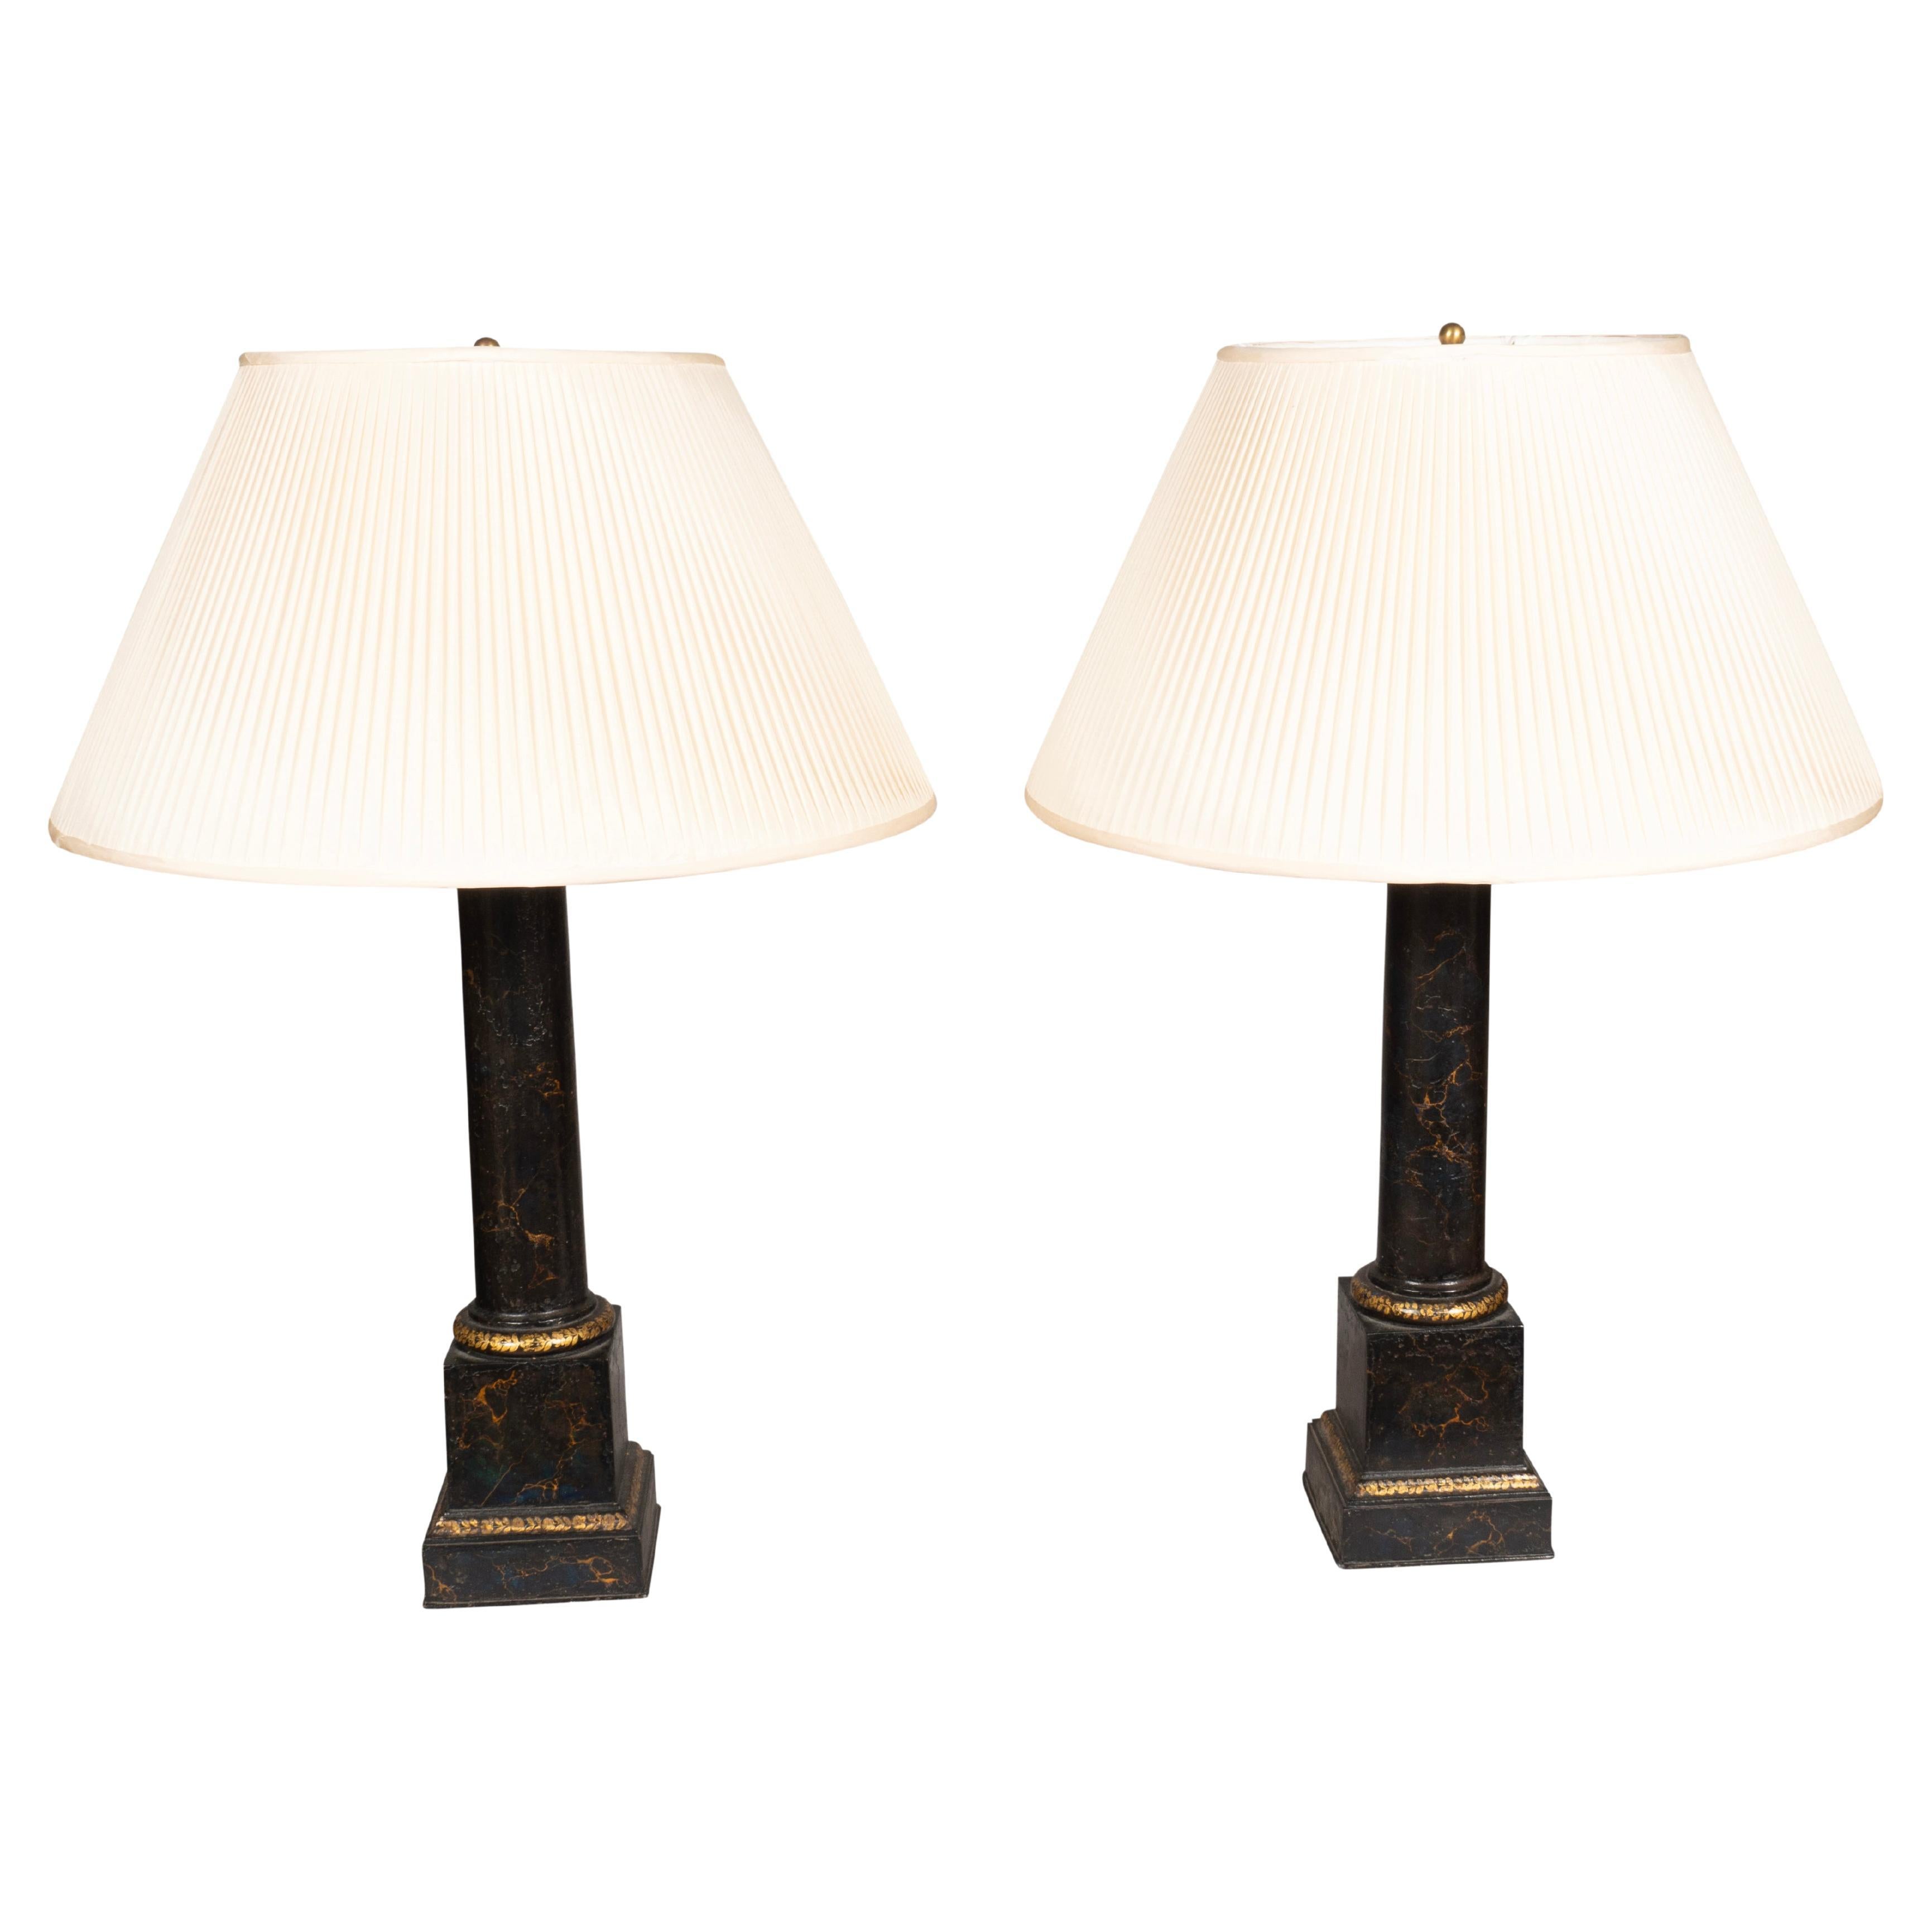 Charles X Table Lamps